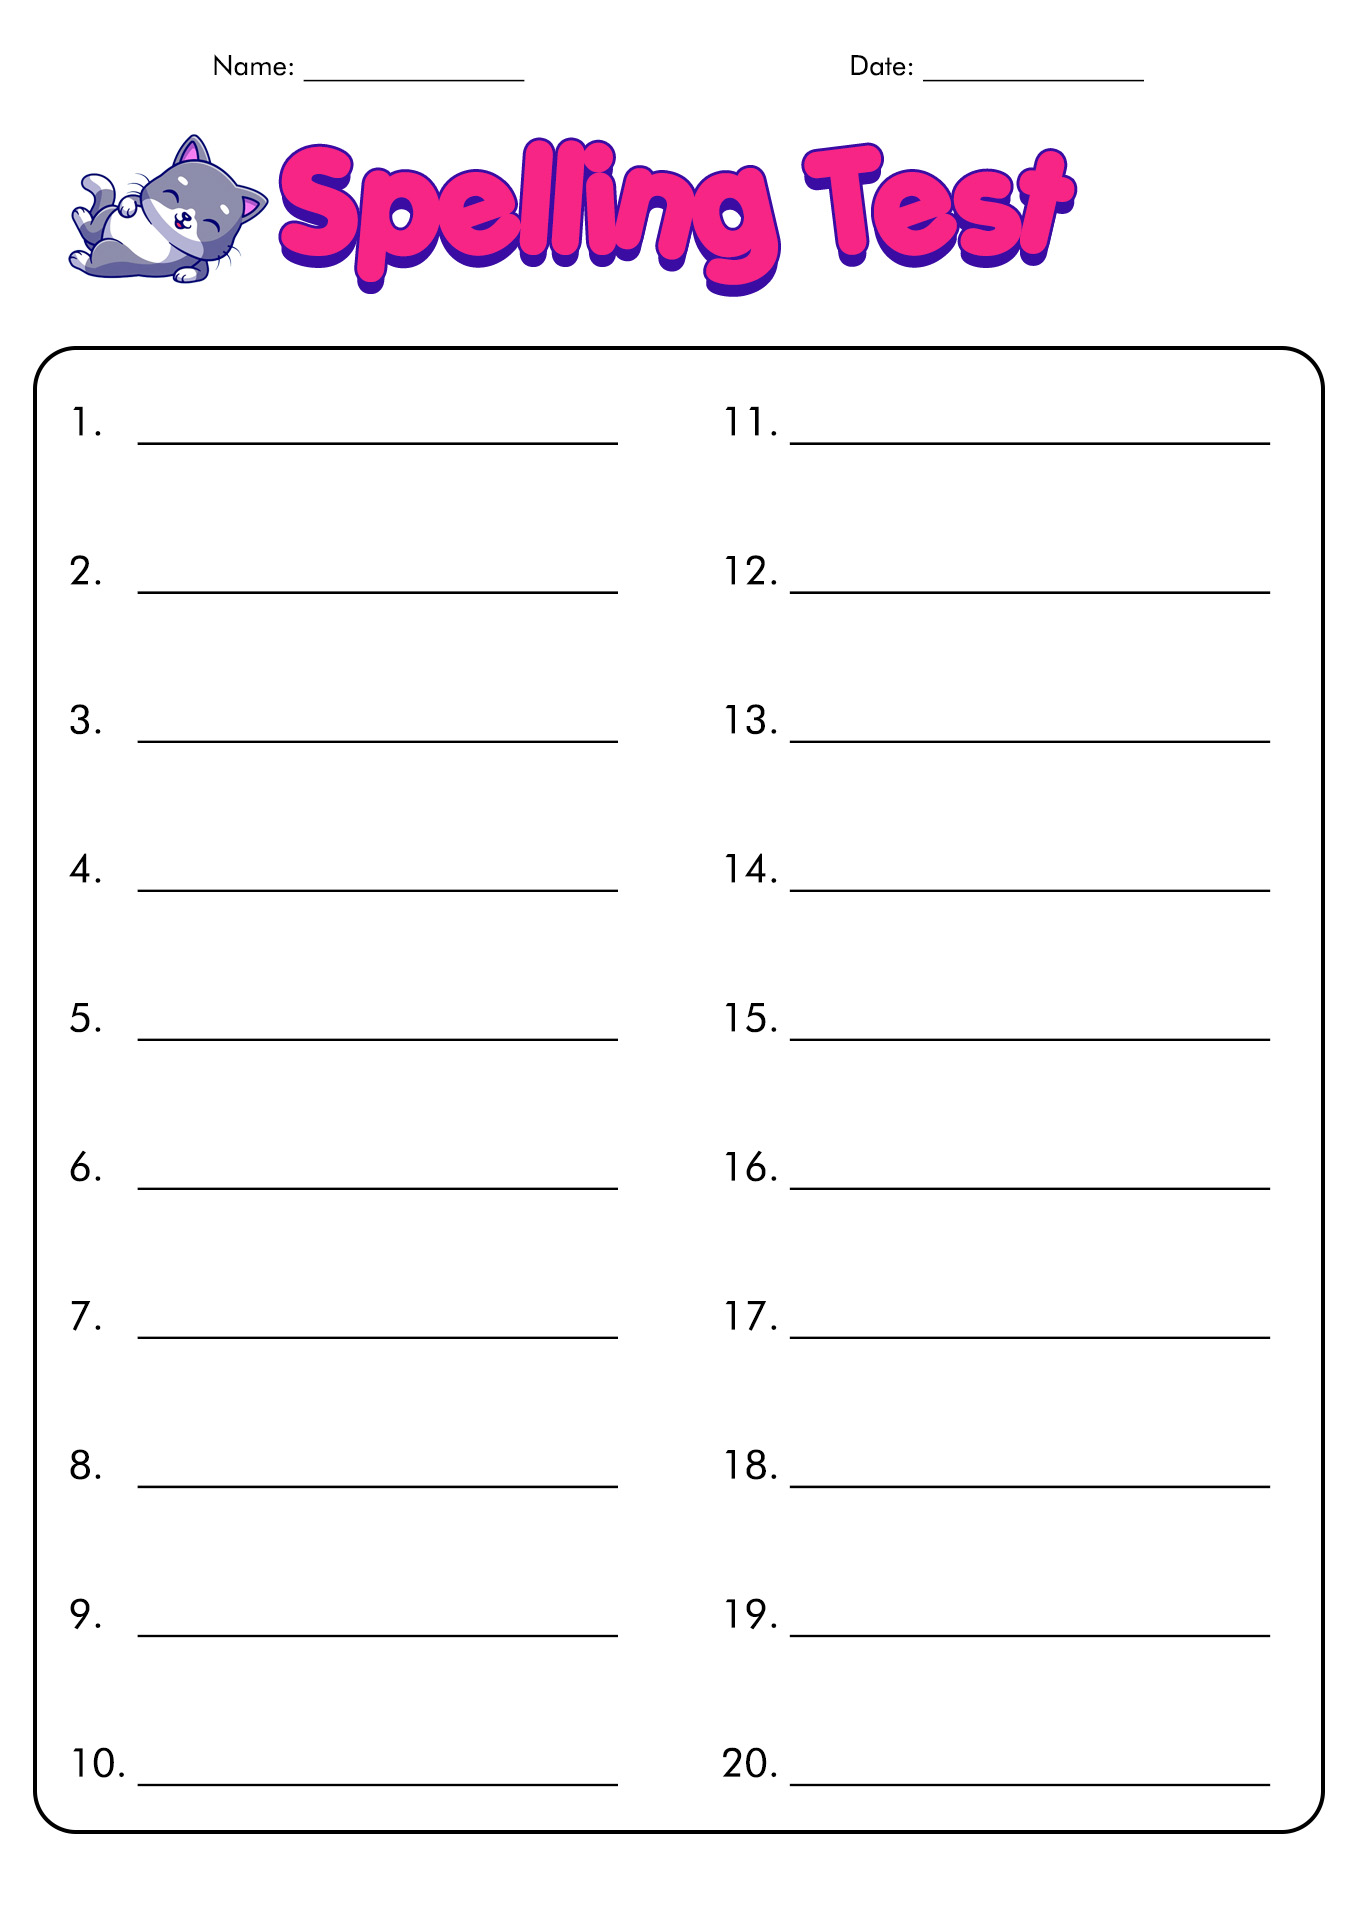 spelling-test-template-free-printable-printable-word-searches